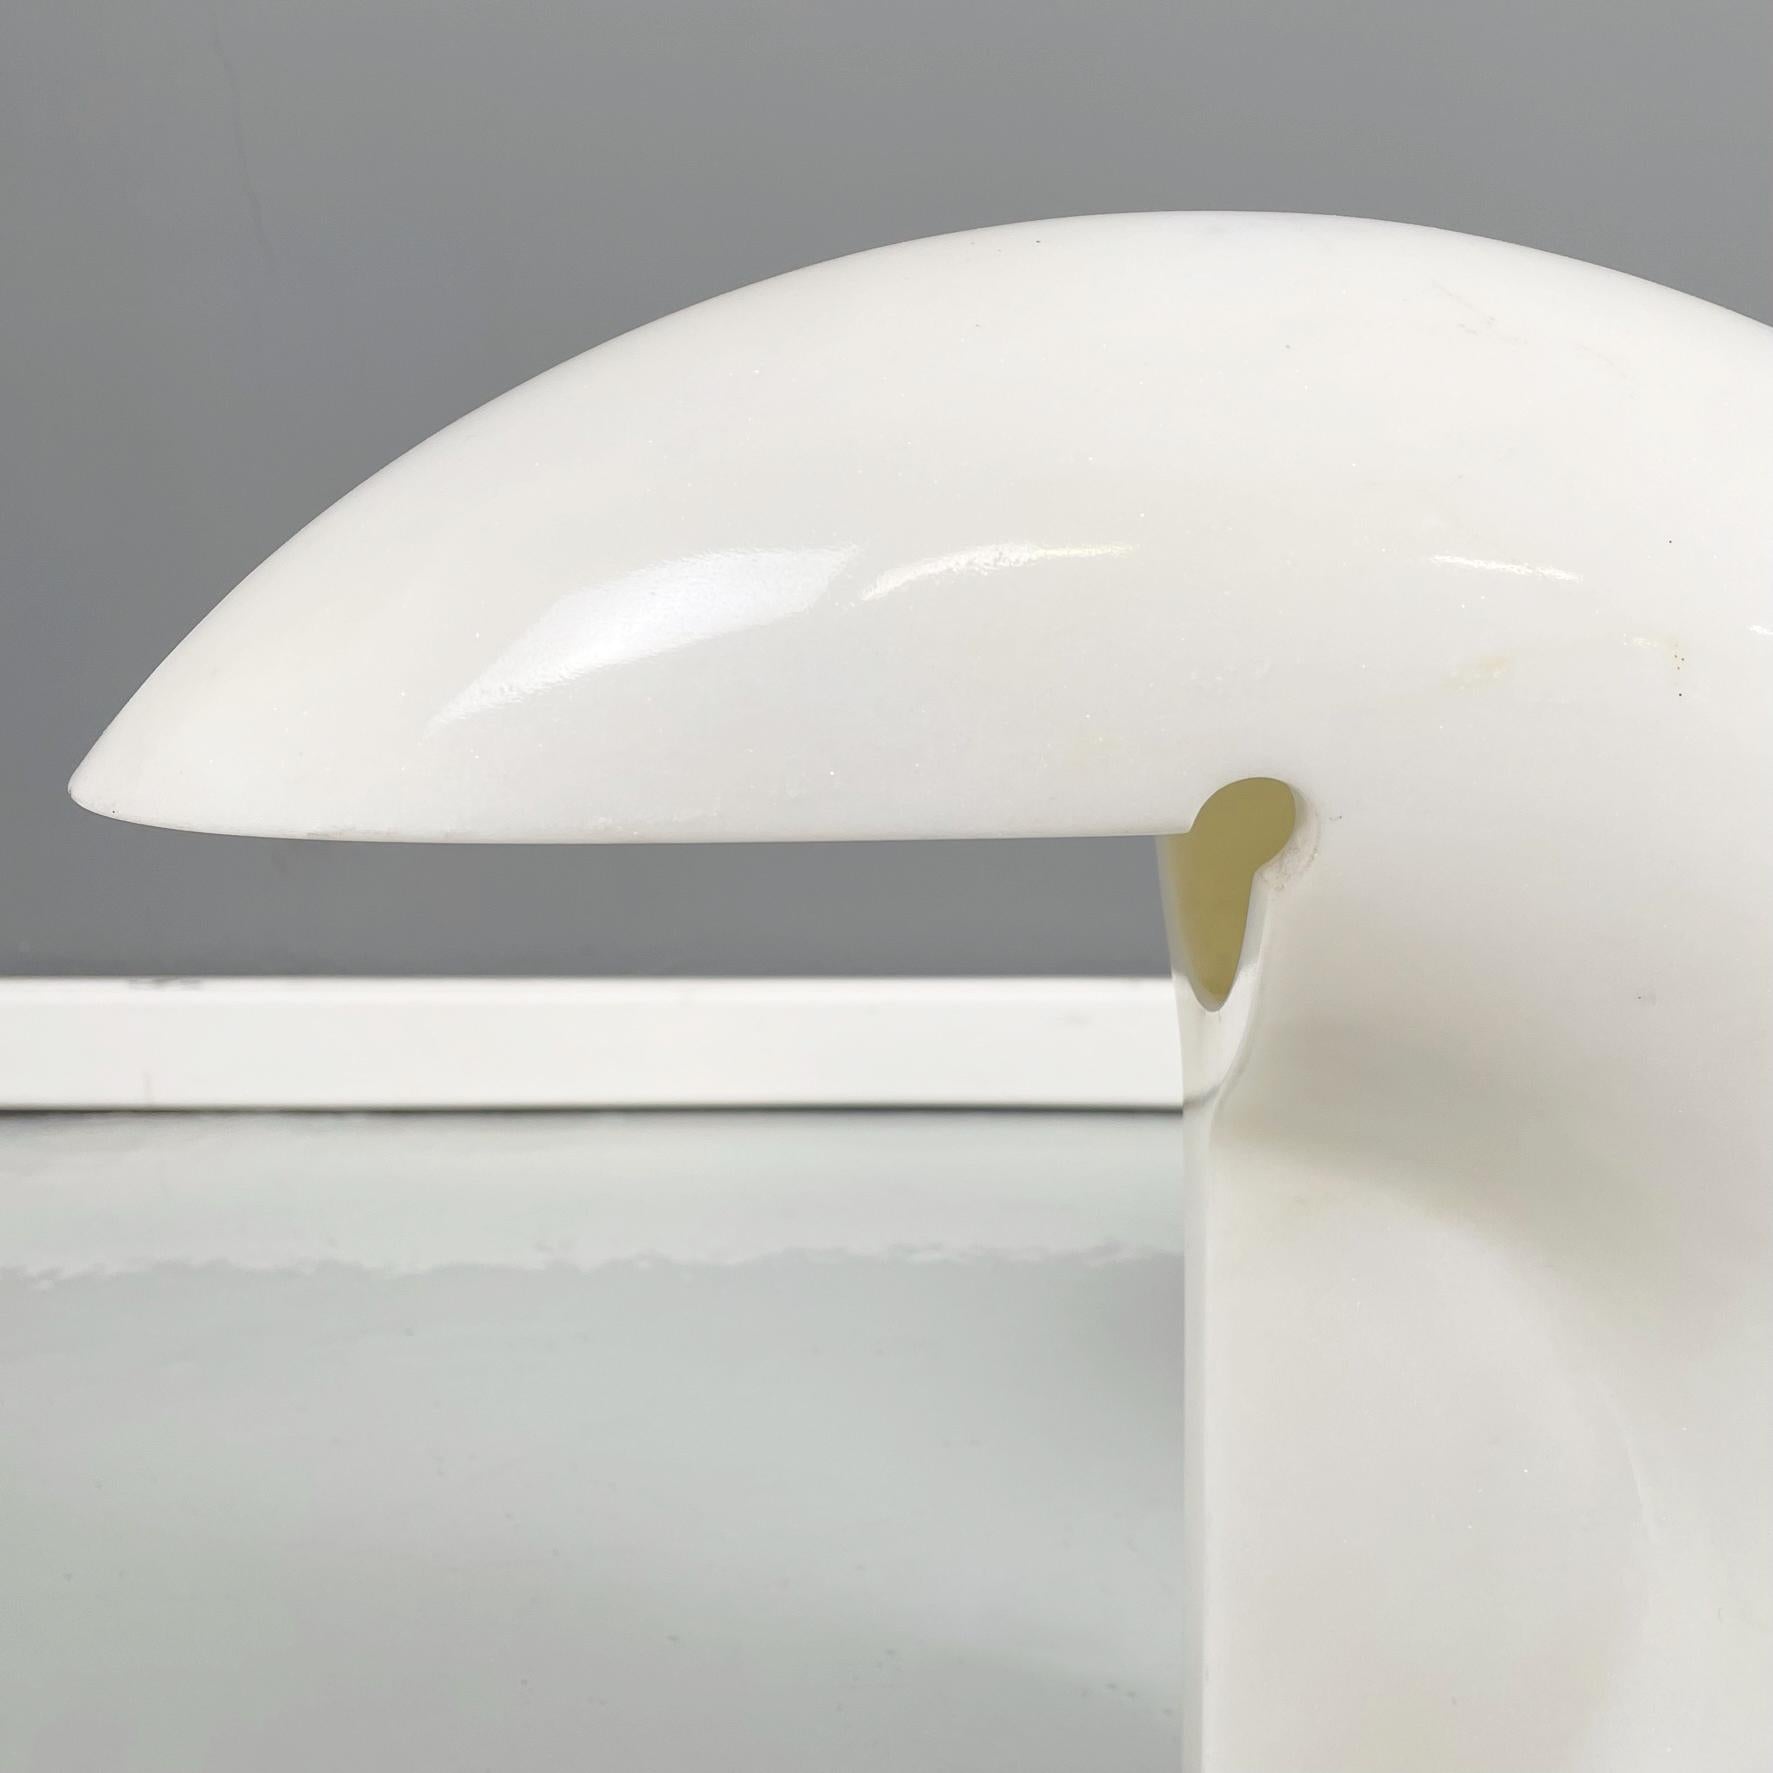 Italian Modern Carrara Marble Table Lamp Biagio by Tobia Scarpa for Flos, 1970s For Sale 4